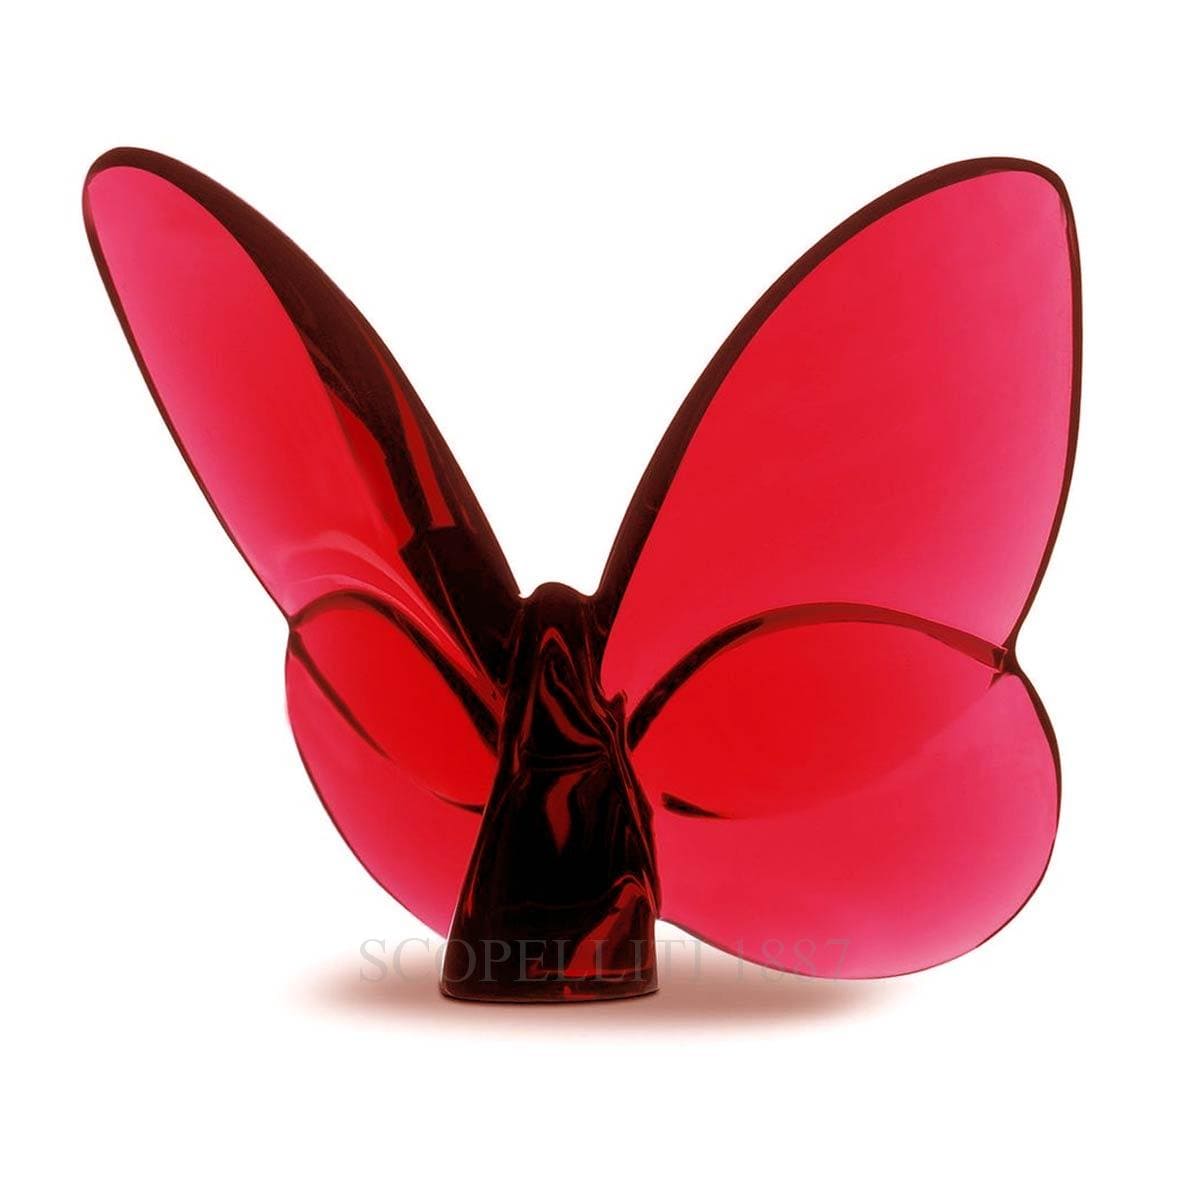 baccarat french design red porte bonheur butterfly